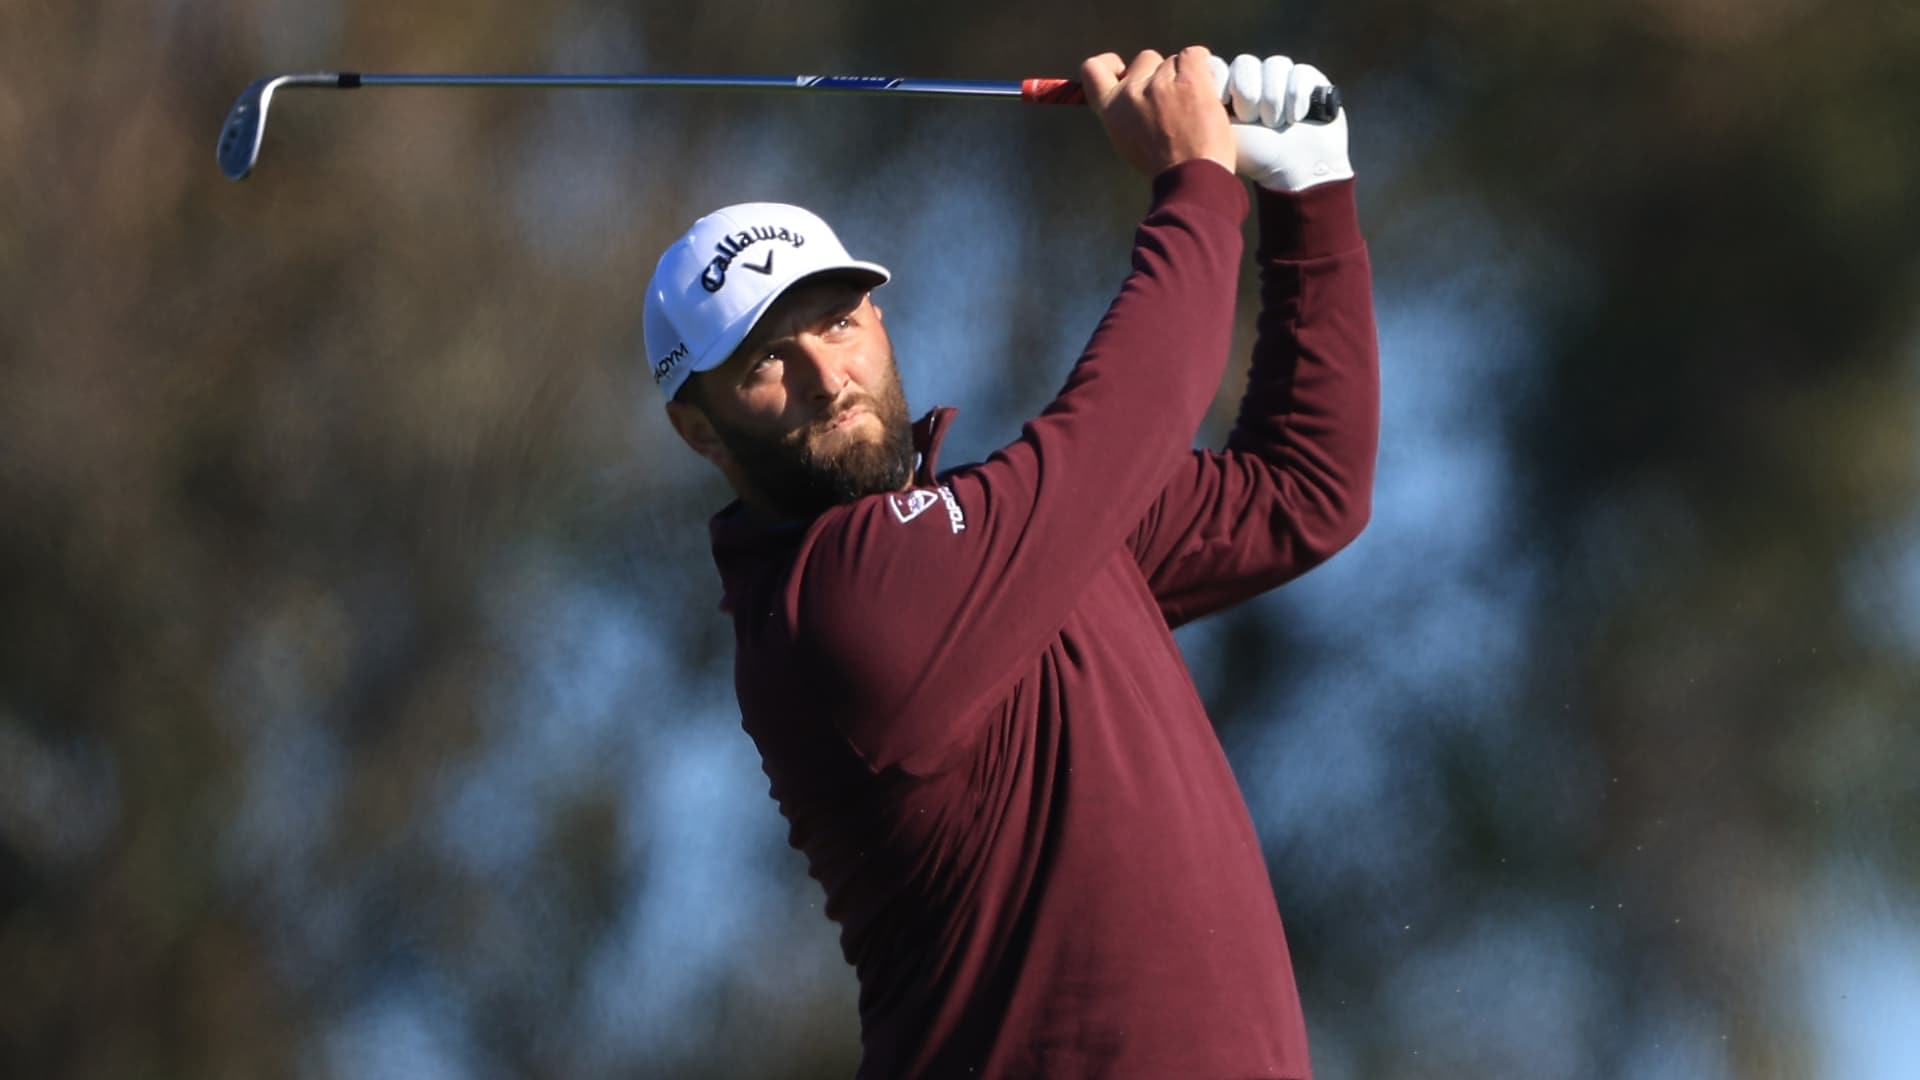 Jon Rahm struggles to 1-over 73 in 1st round at Torrey Pines